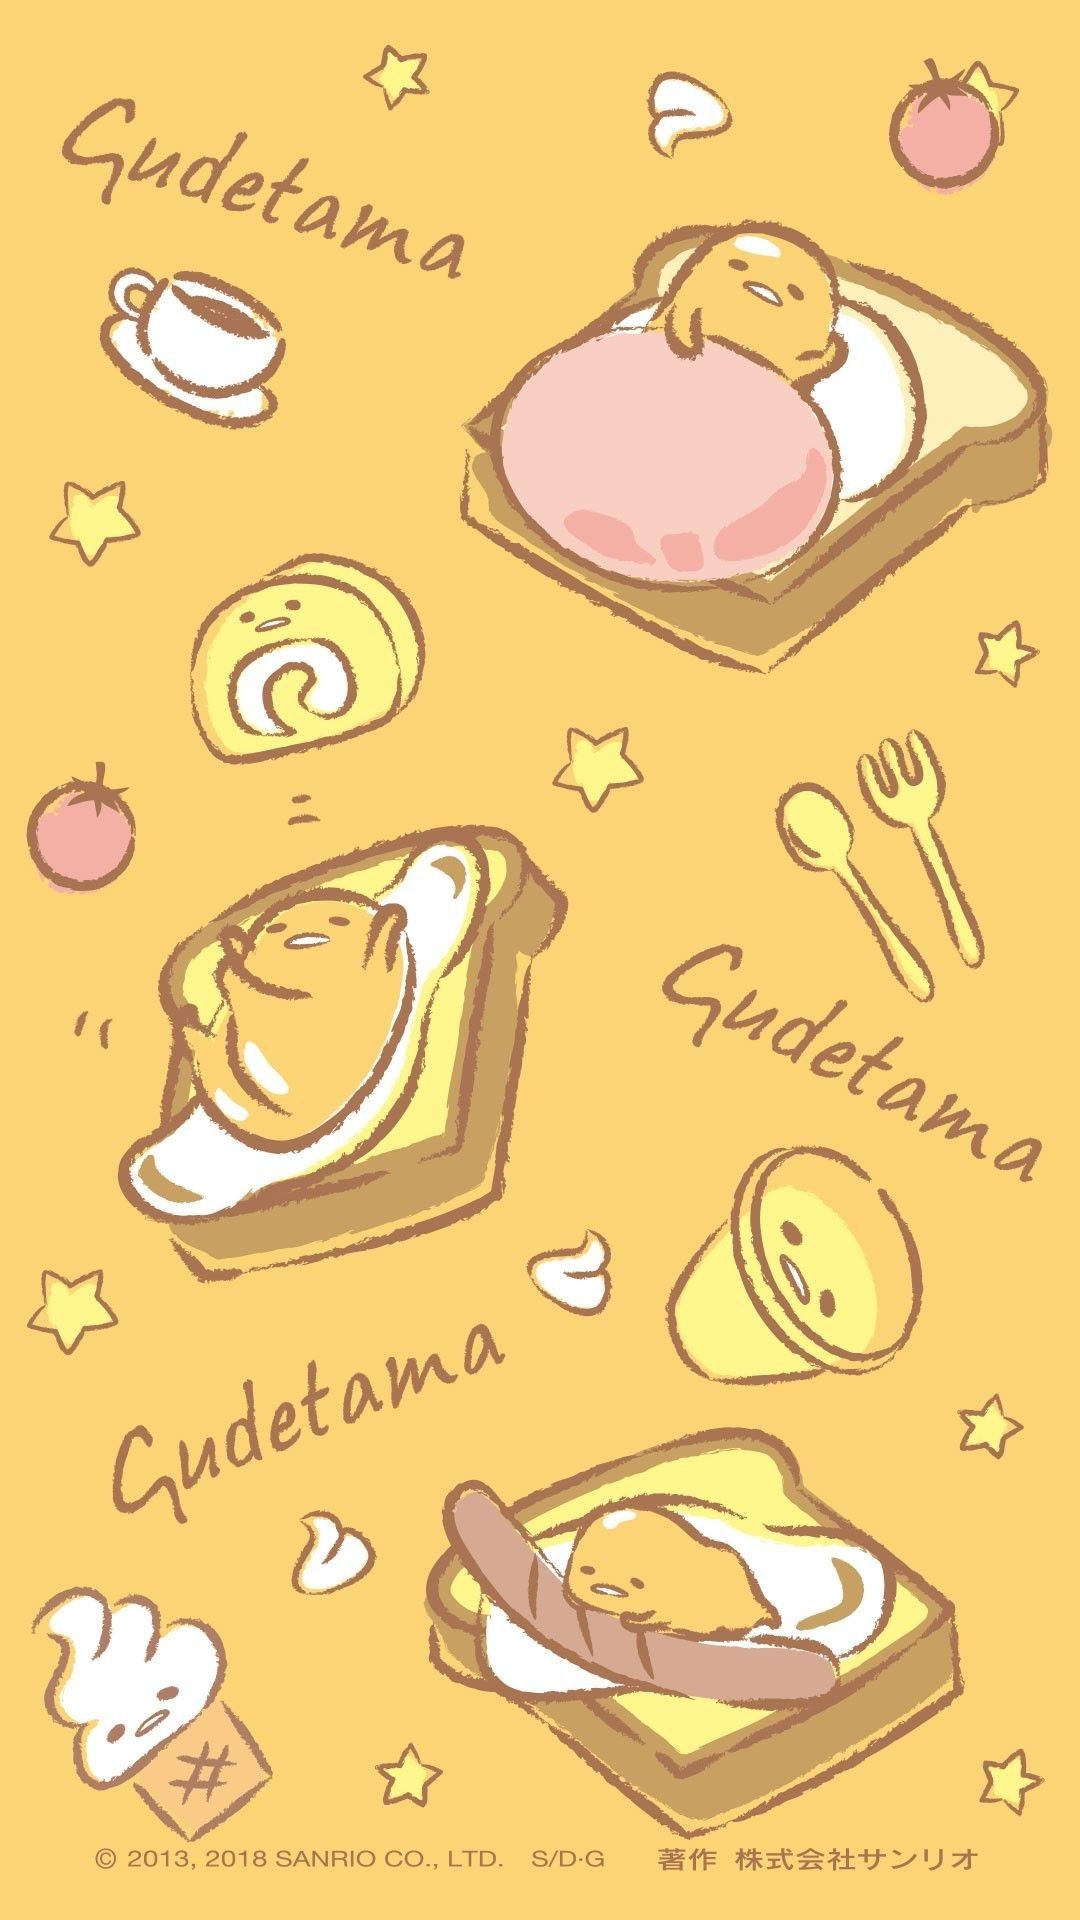 A poster with different foods on it - Gudetama